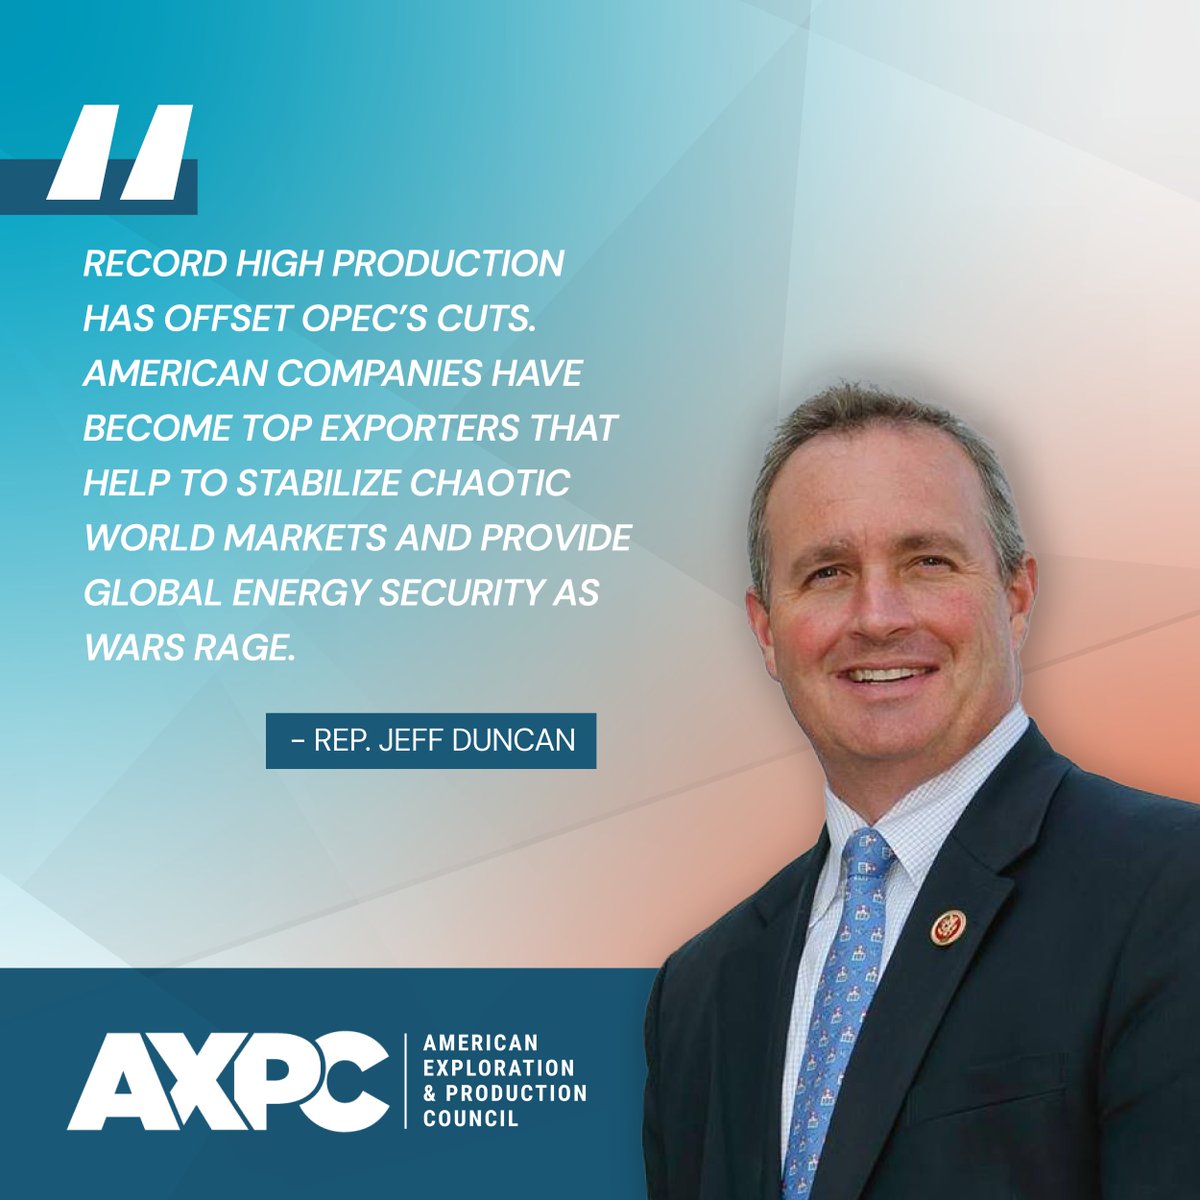 .@RepJeffDuncan is spot on: 'America emerged as the top producer of oil and natural gas.' 'Record high production has offset OPEC’s cuts. American companies have become top exporters that help to stabilize chaotic world markets and provide global energy security as wars rage.'